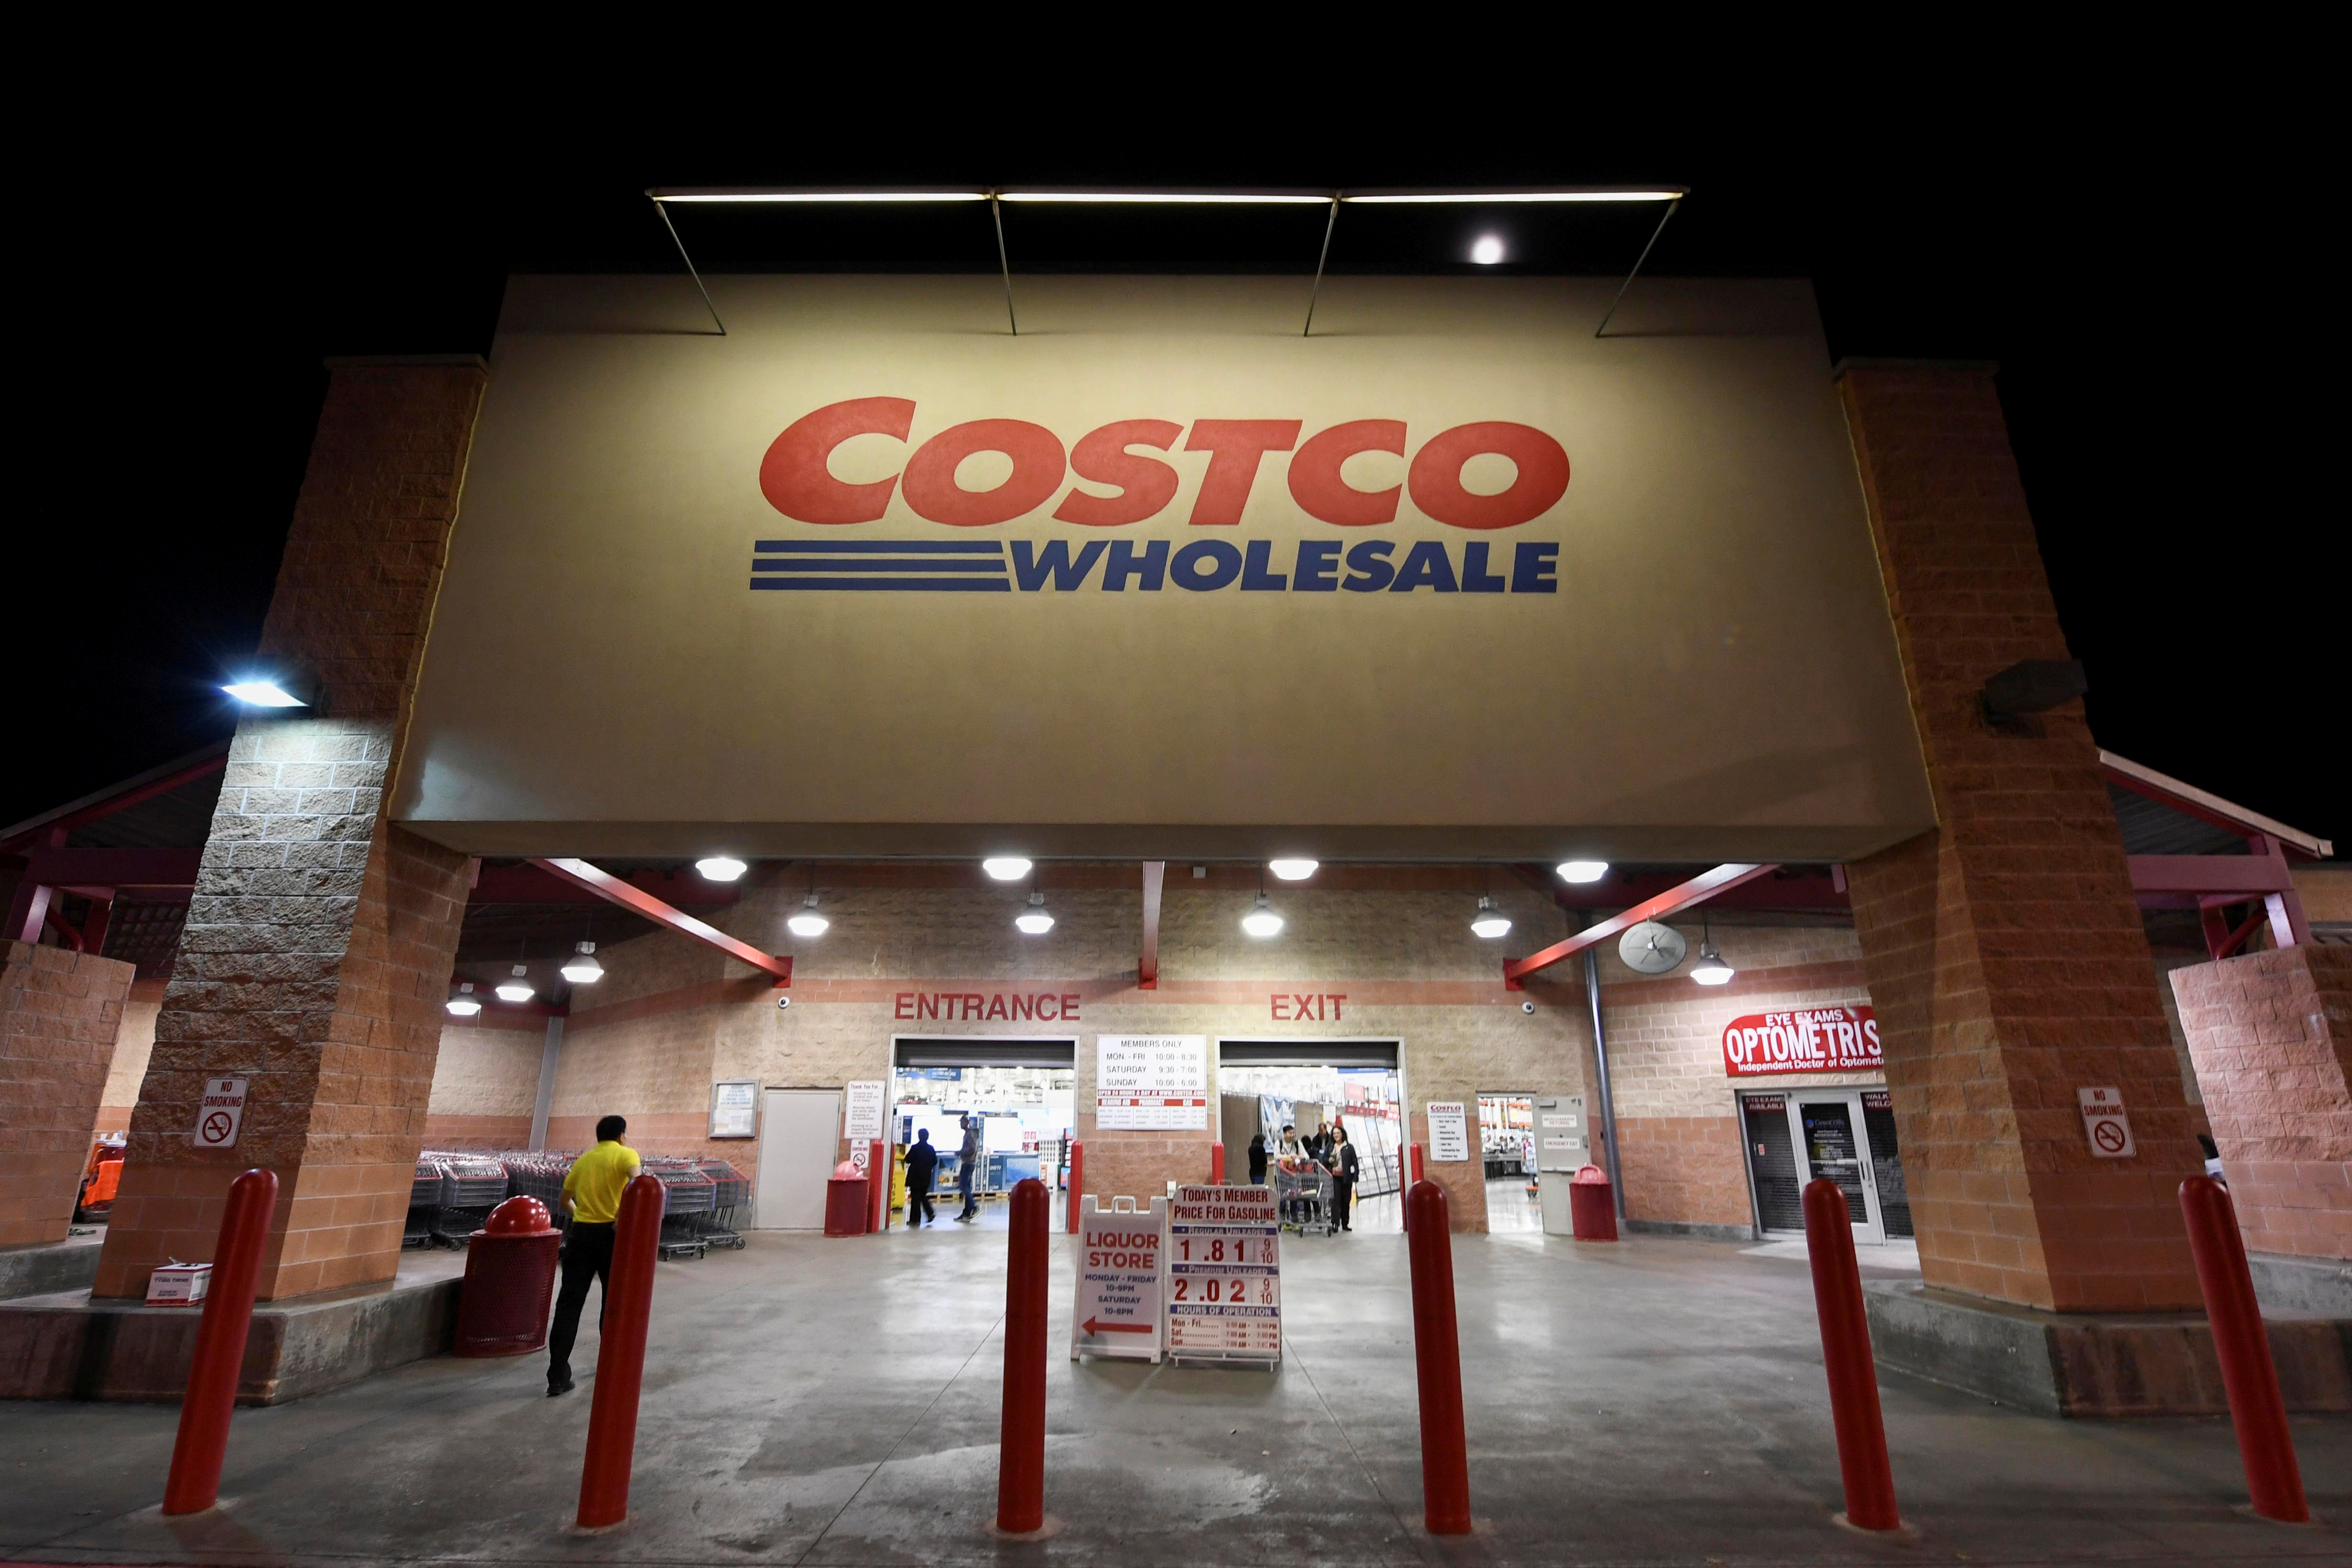 A Costco Wholesale retail club is photographed in Austin, Texas, U.S.